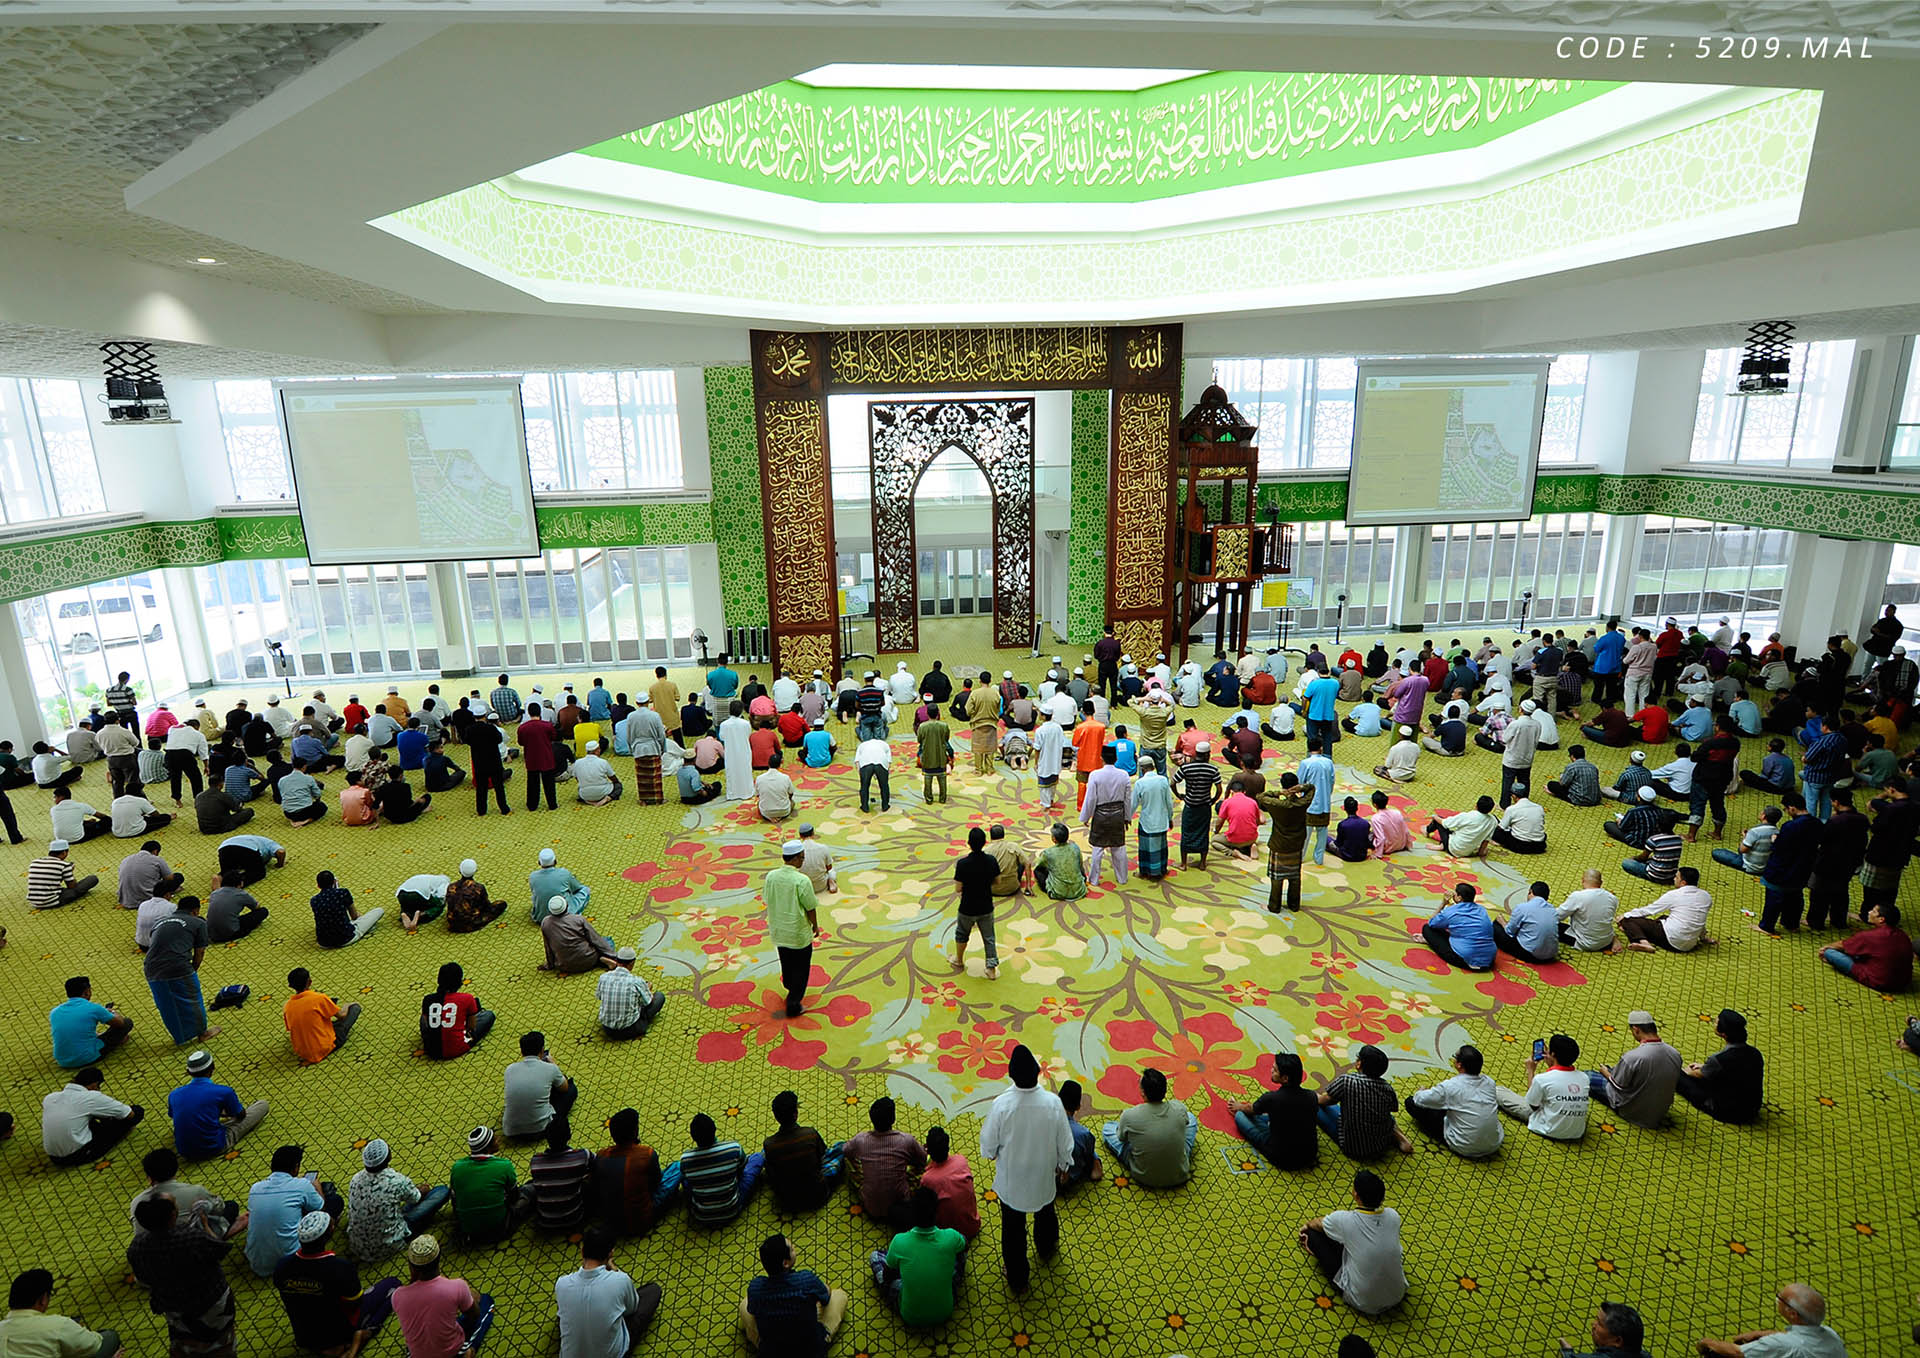 <p>View from above of the main prayers hall before the Friday prayers</p>